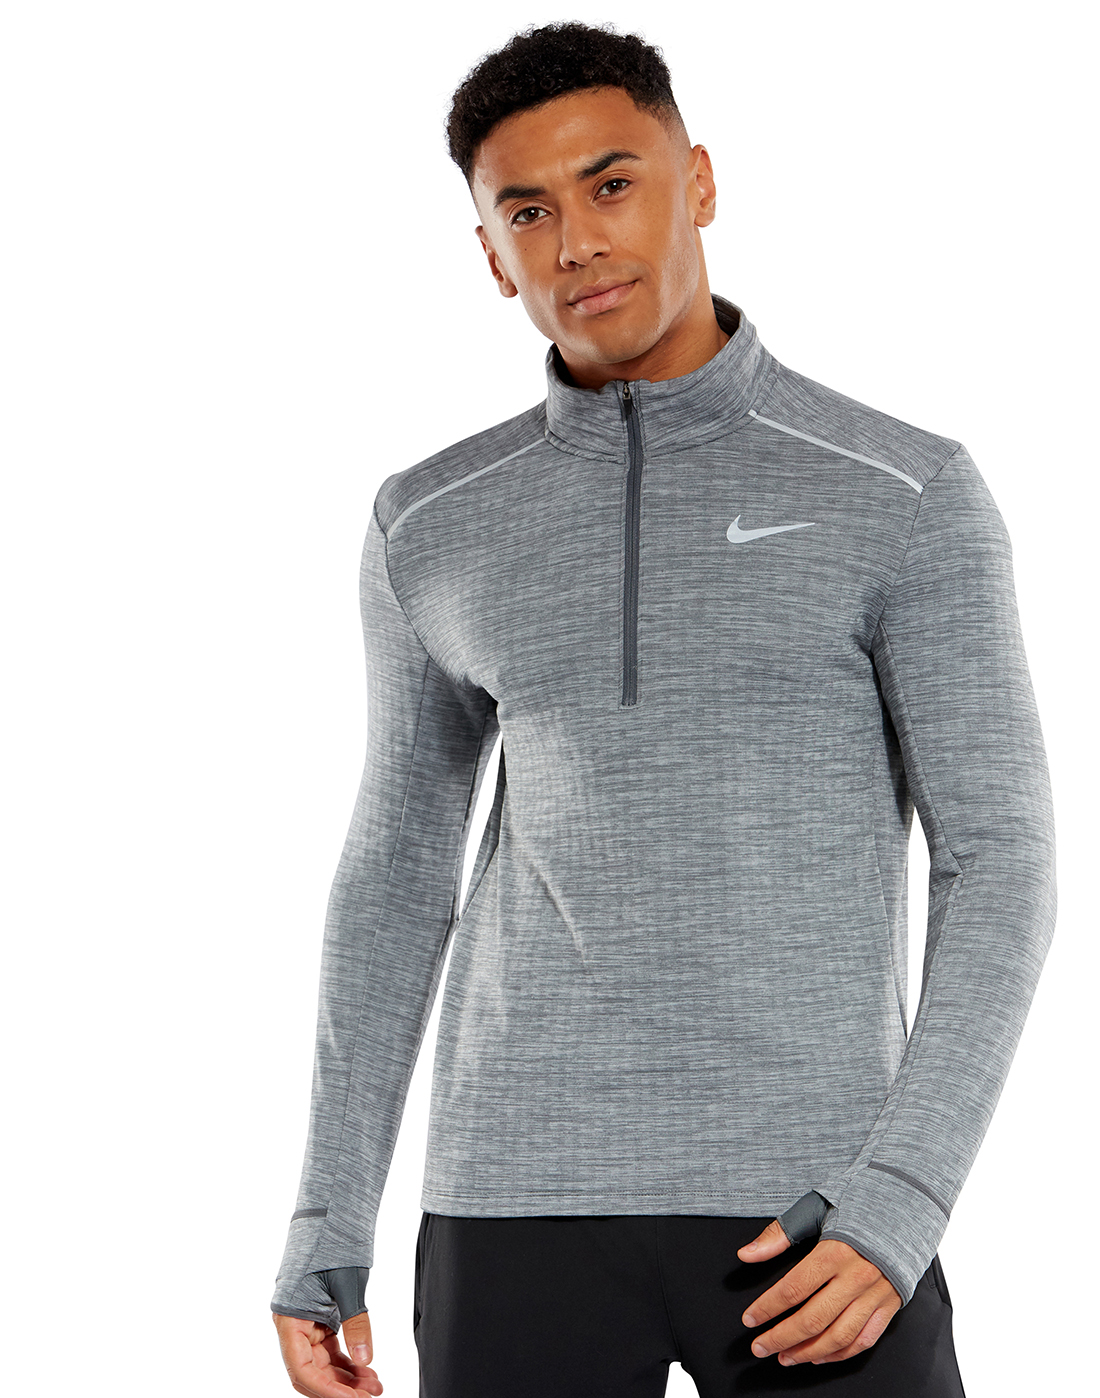 A rayas Pigmento Heredero Nike Mens Sphere Element Half Zip Top - Grey | Life Style Sports IE